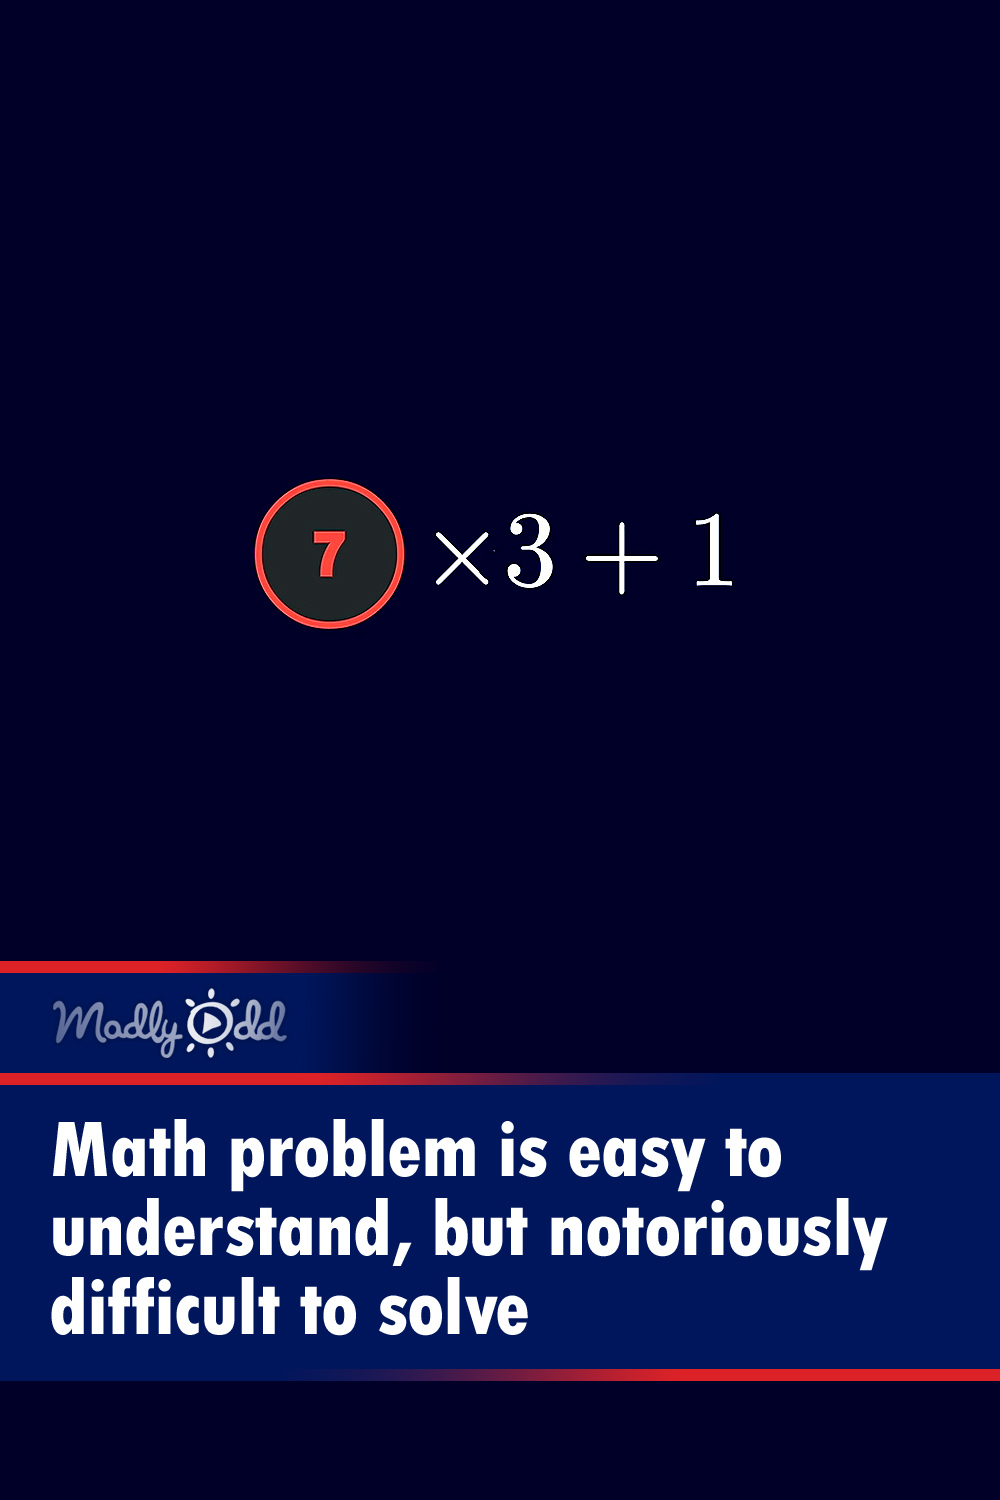 Math problem is easy to understand, but notoriously difficult to solve